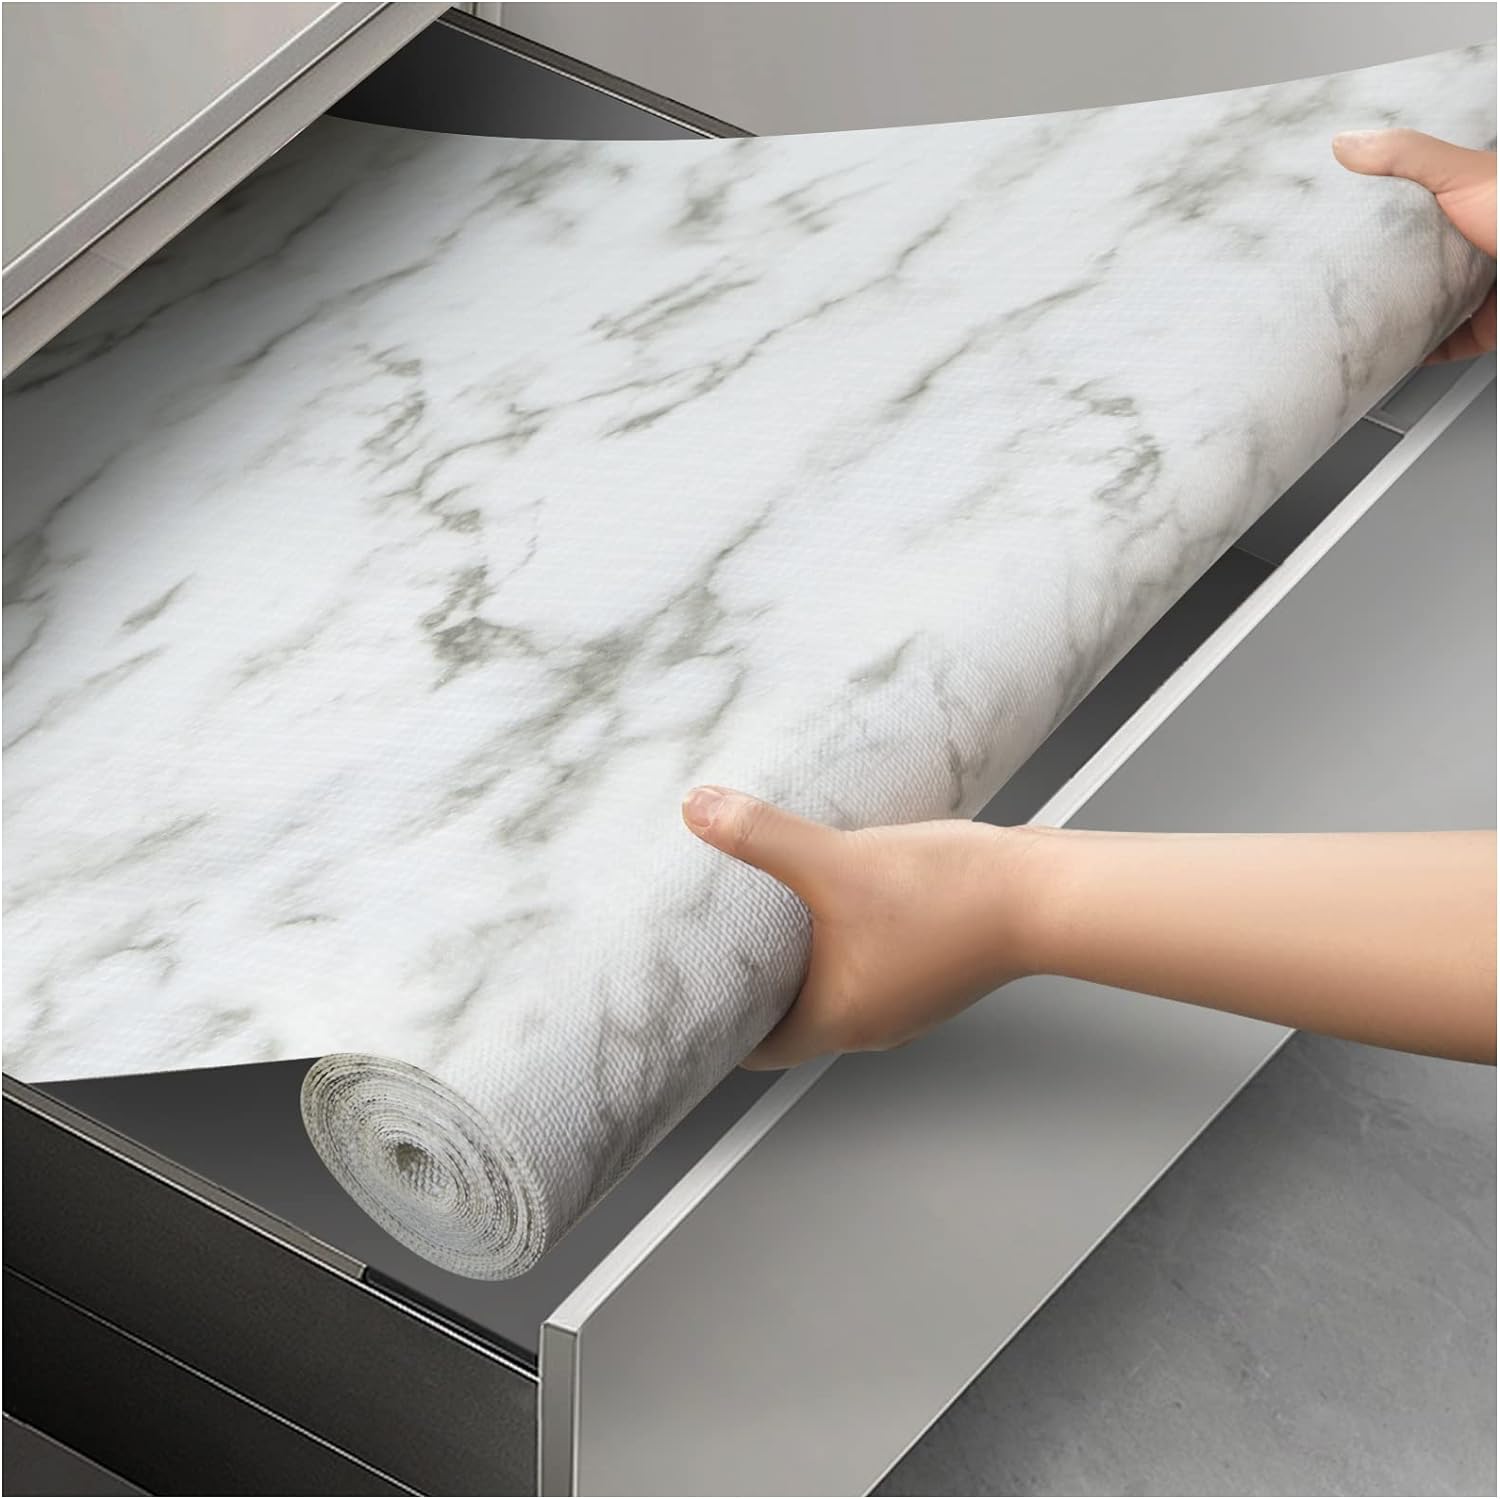 Anoak Shelf Liner Cabinet Liner Non Adhesive Drawer Liner Washable 175 inch x 20 FT(240 inch) Waterproof Durable Non-Slip Shelf Liner for Kitchen Draw